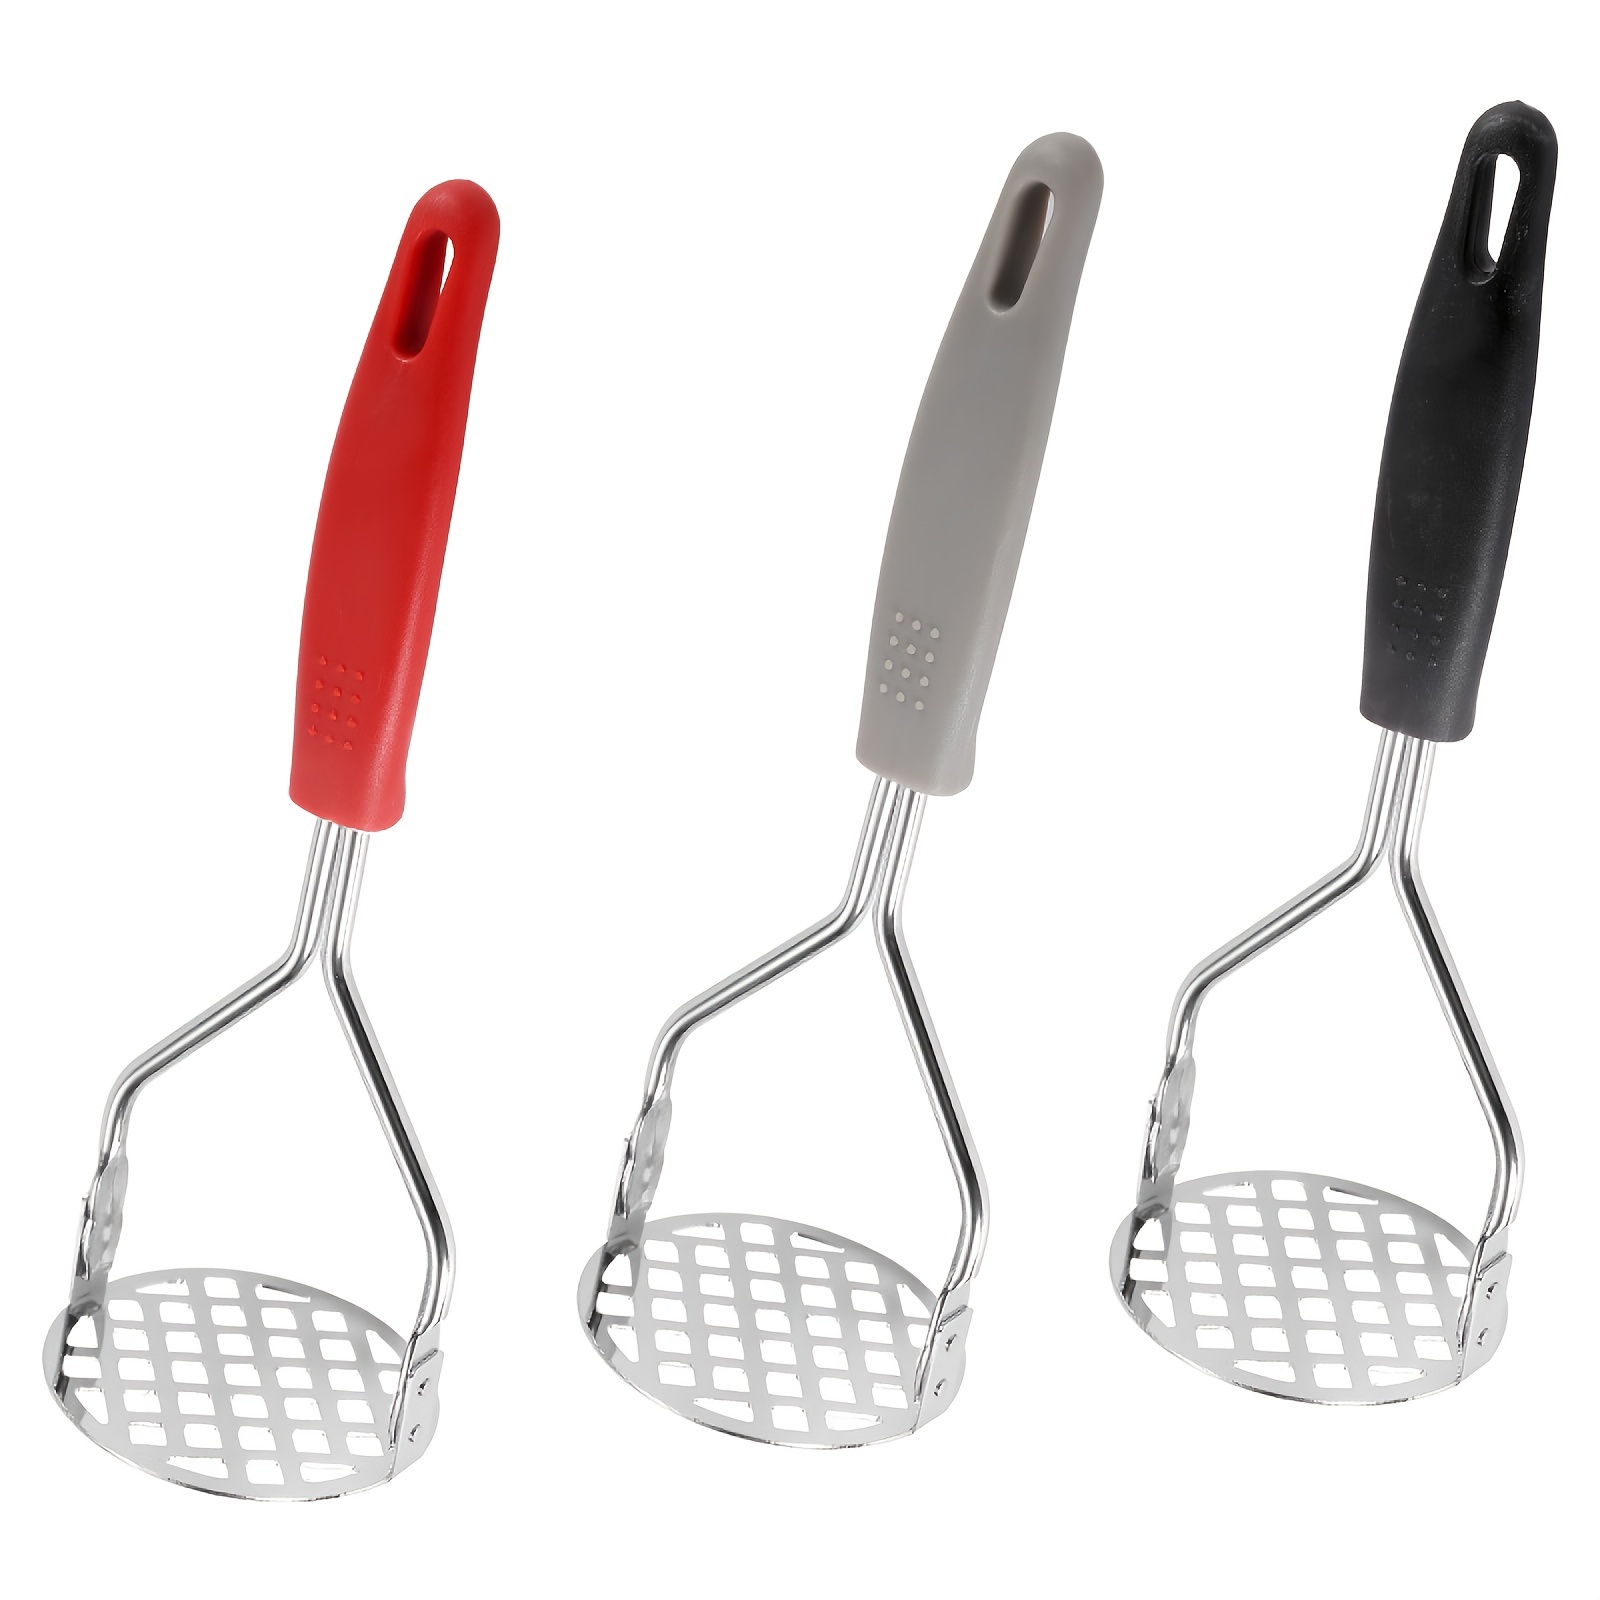 Heavy Duty Stainless Steel Potato Masher, Professional Integrated